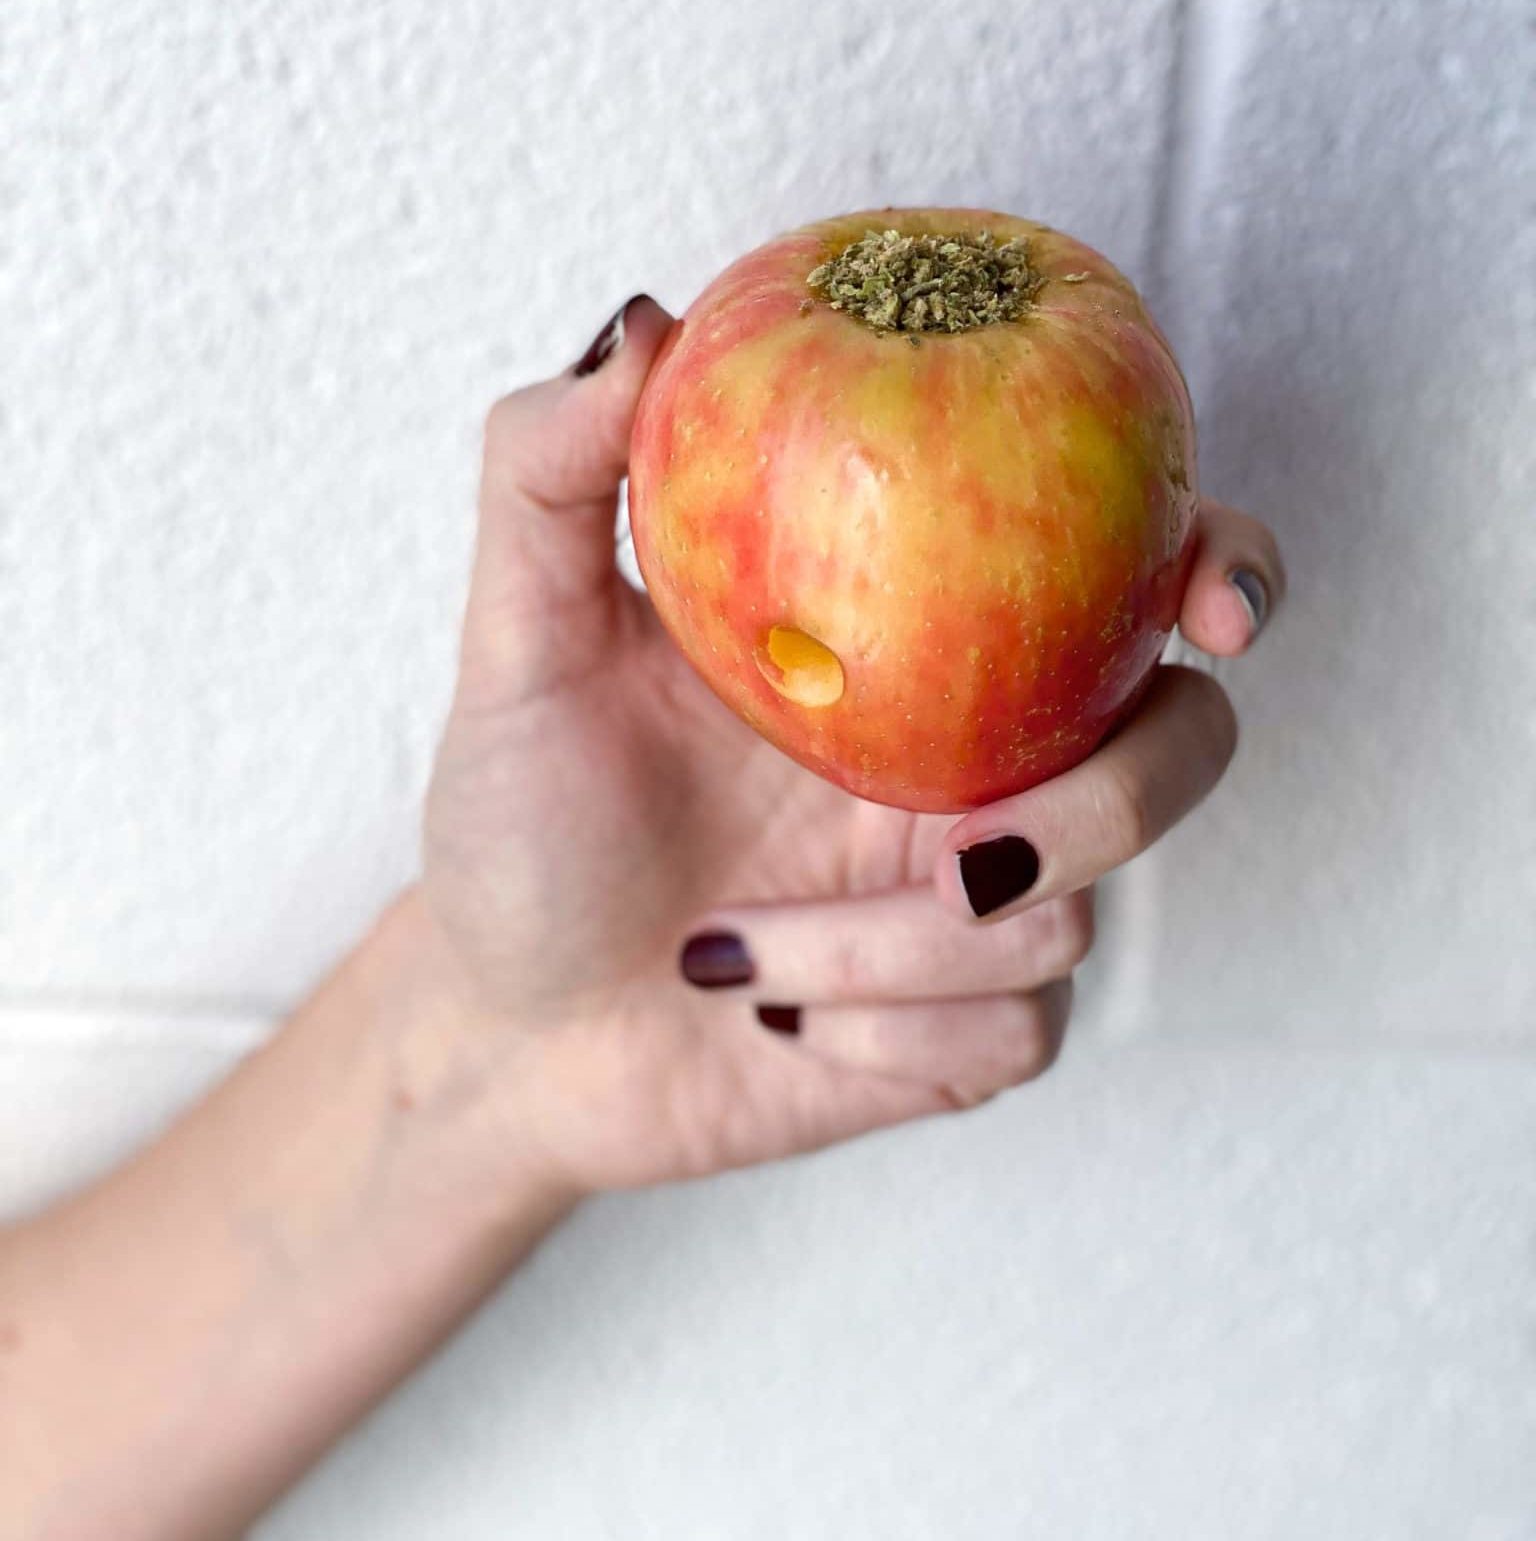 hand holding a DIY apple pipe with cannabis flower